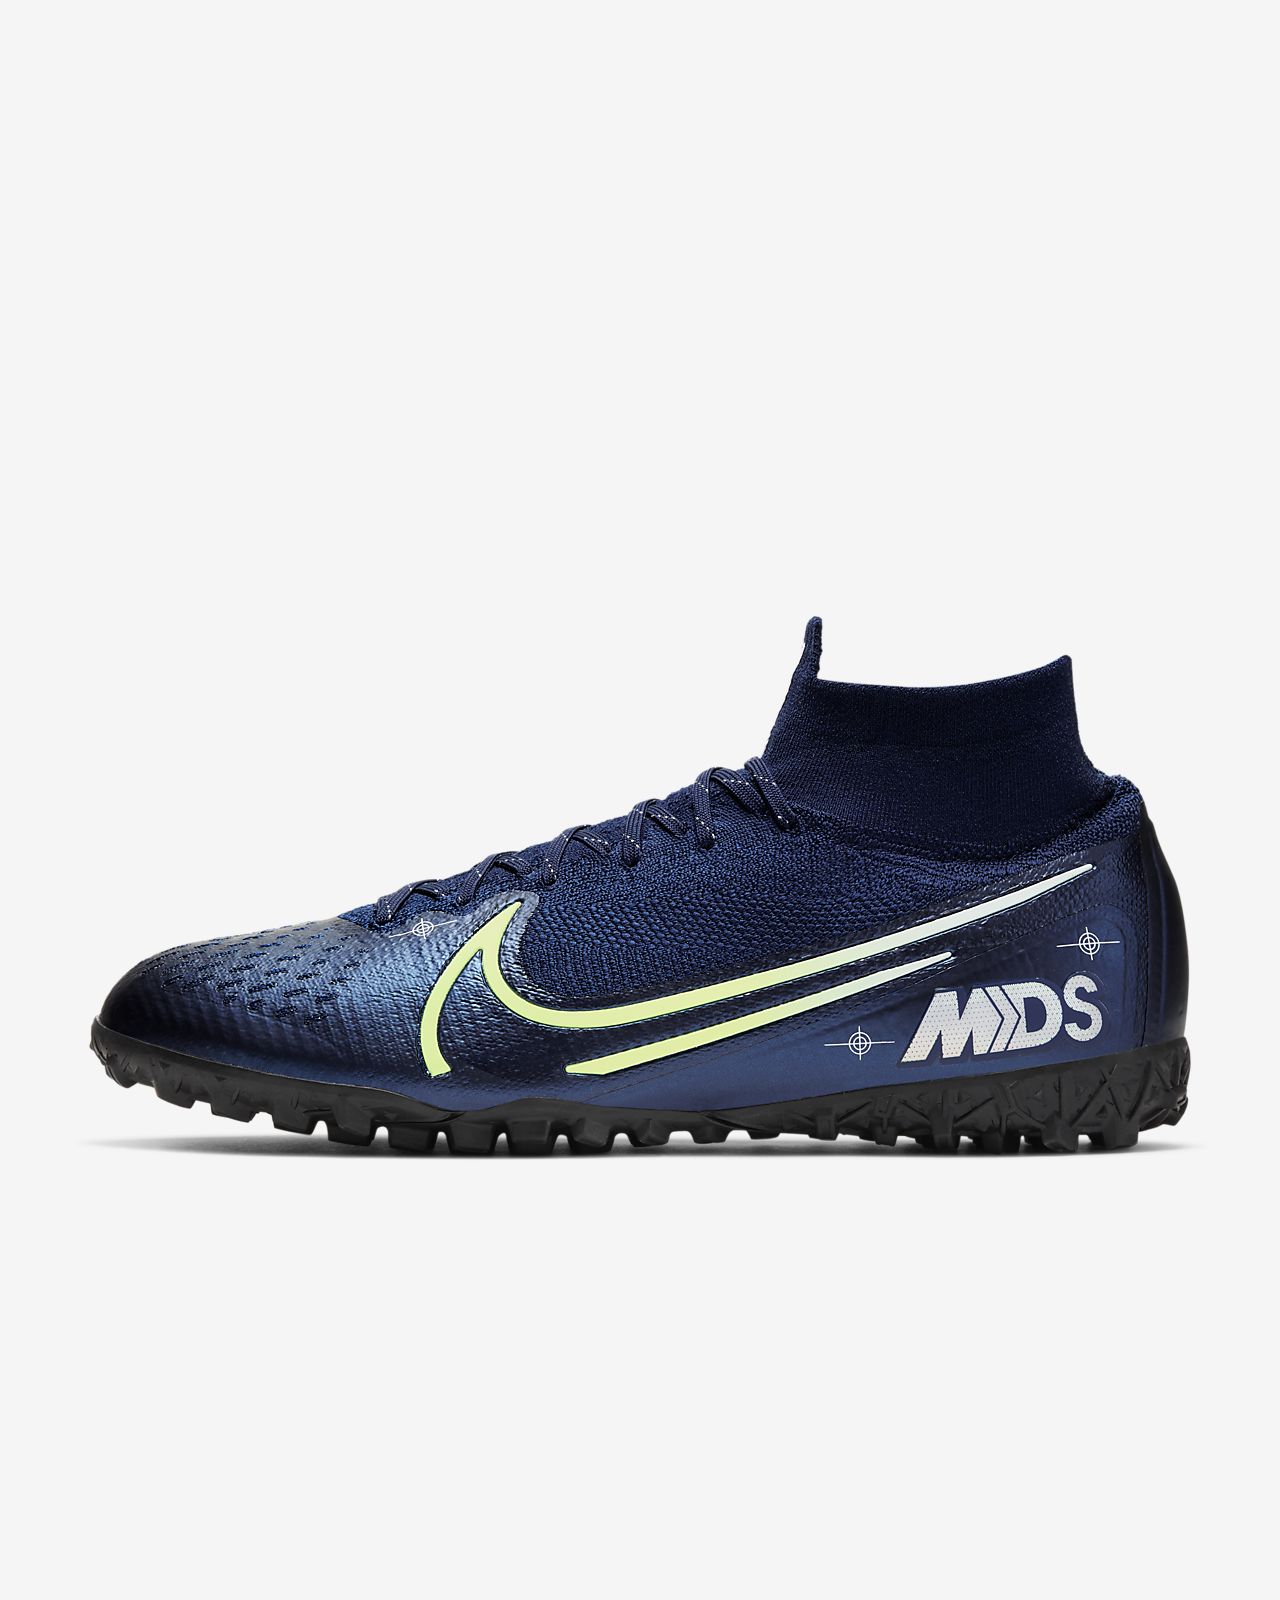 Cheap nike mercurial superfly nike magista soccer cleats